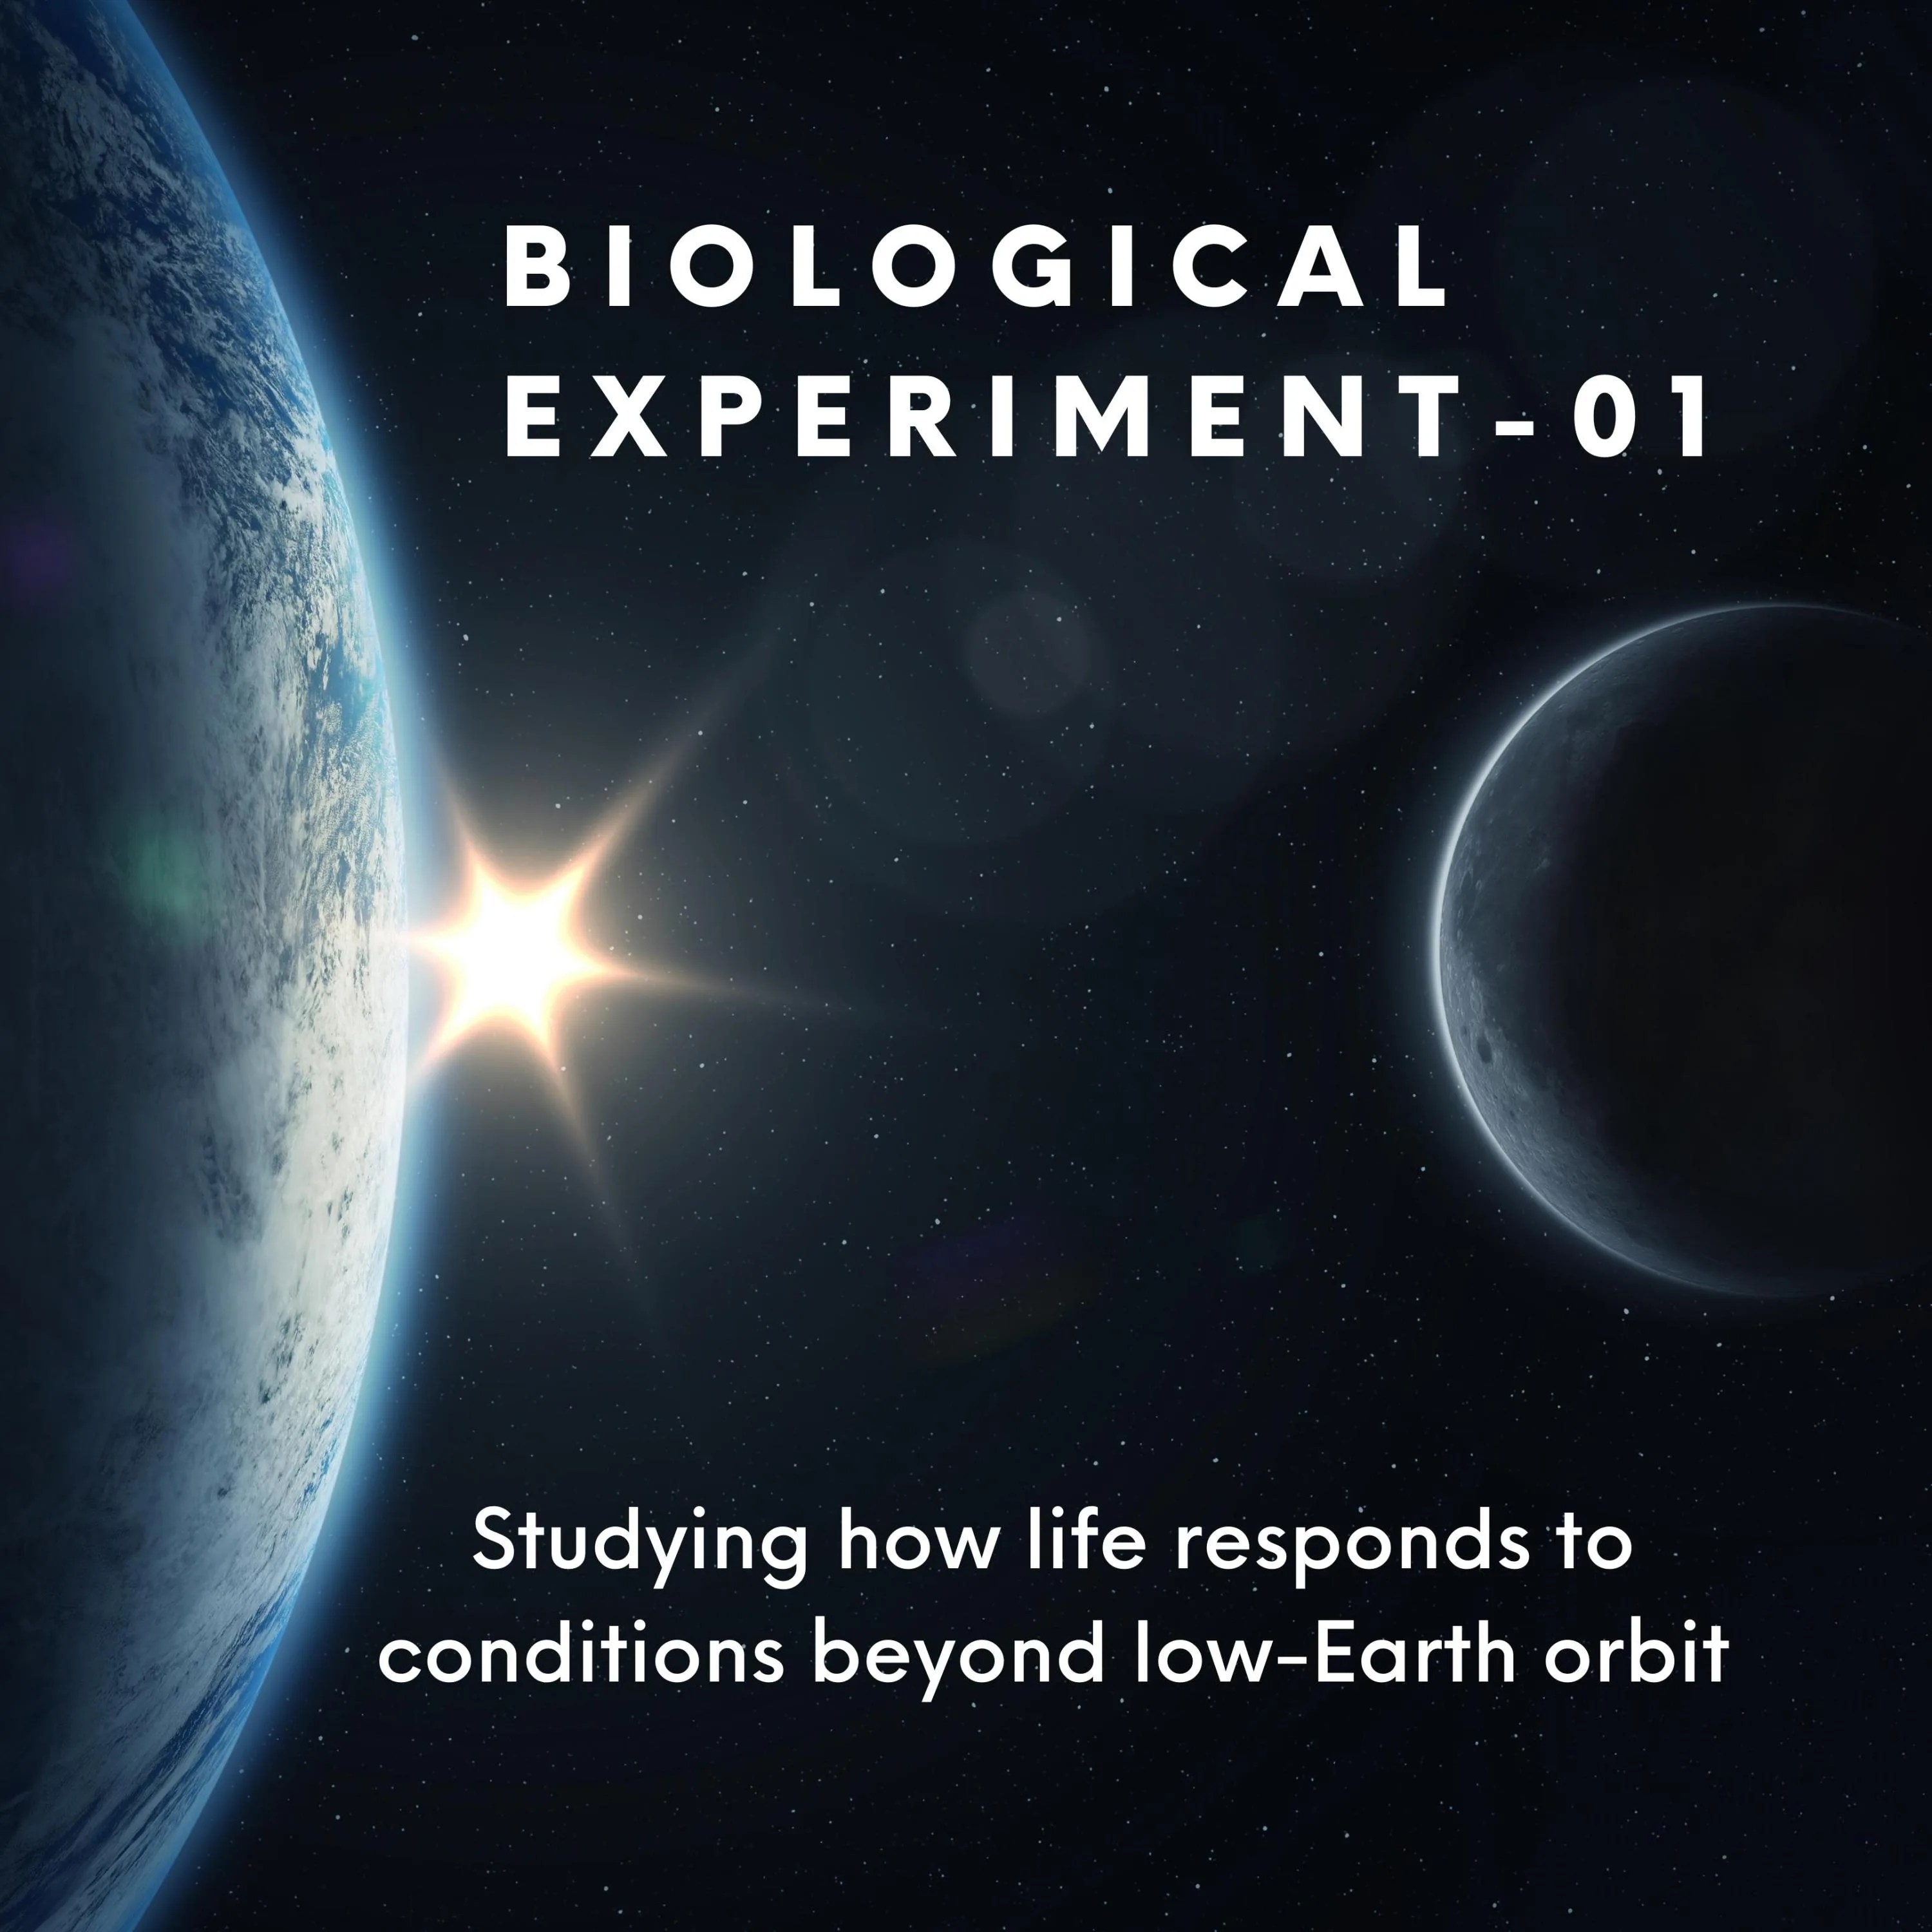 Image of the earth on the left with the sun in the far distance and the moon on the right. Overlaying text reads: Biological Experiment-01 and Studying how life responds to conditions beyond low-Earth orbit.